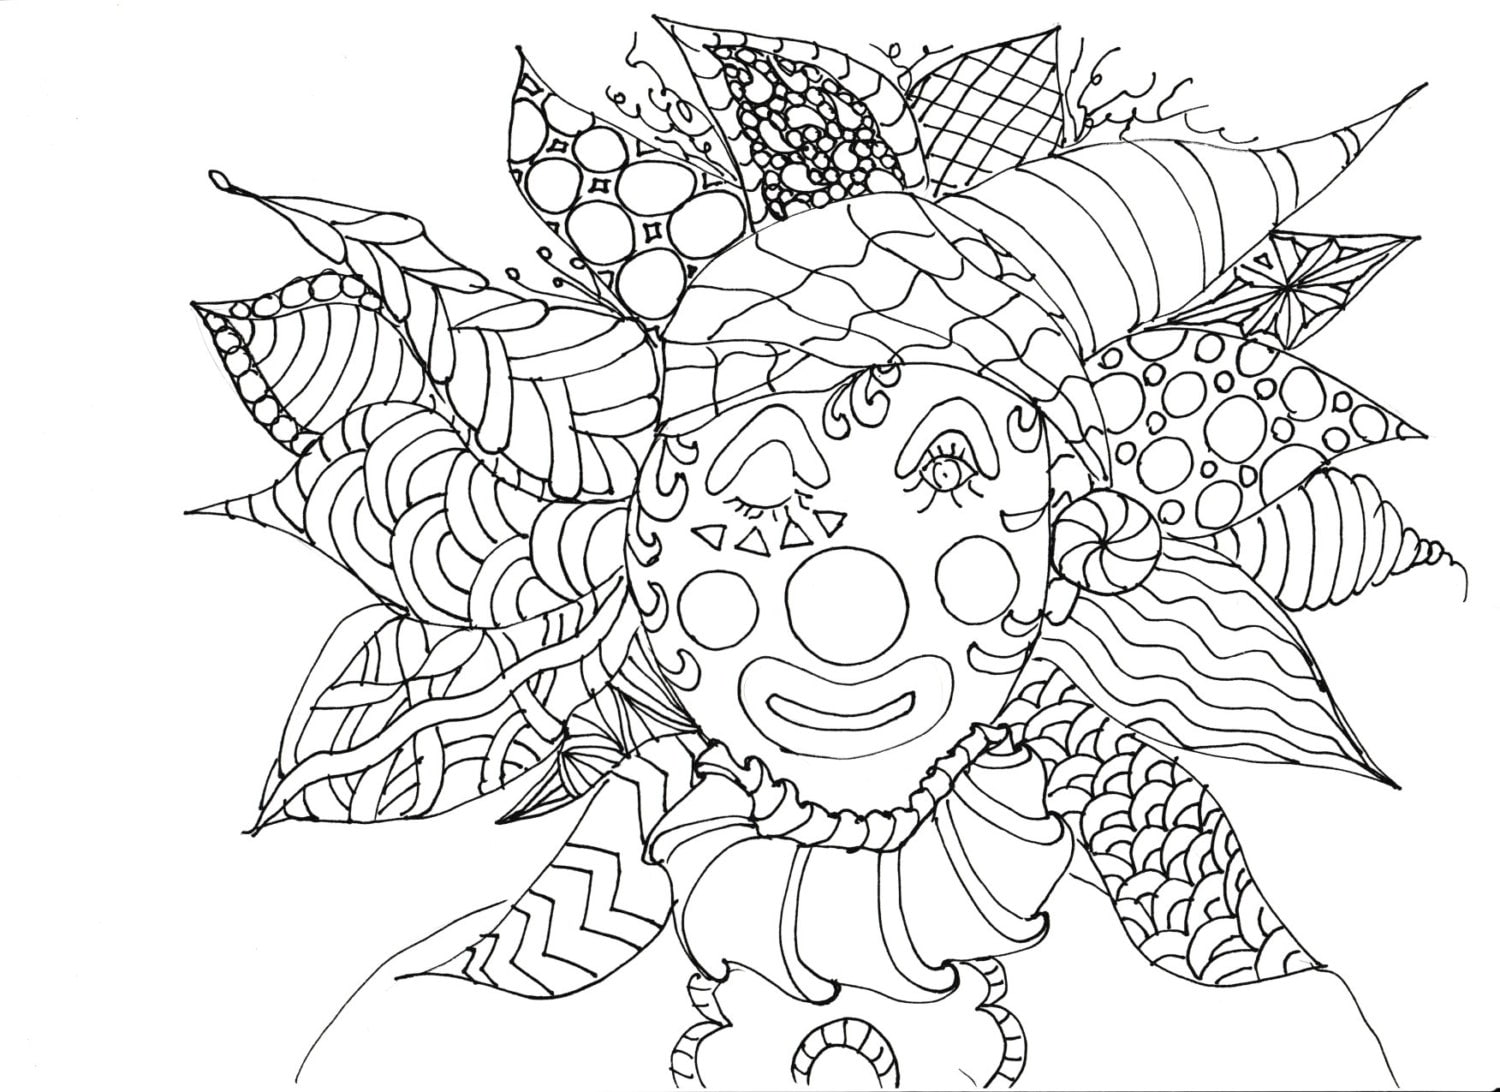 Download Coloring Pages, Printable Coloring Pages, Adult Coloring ...